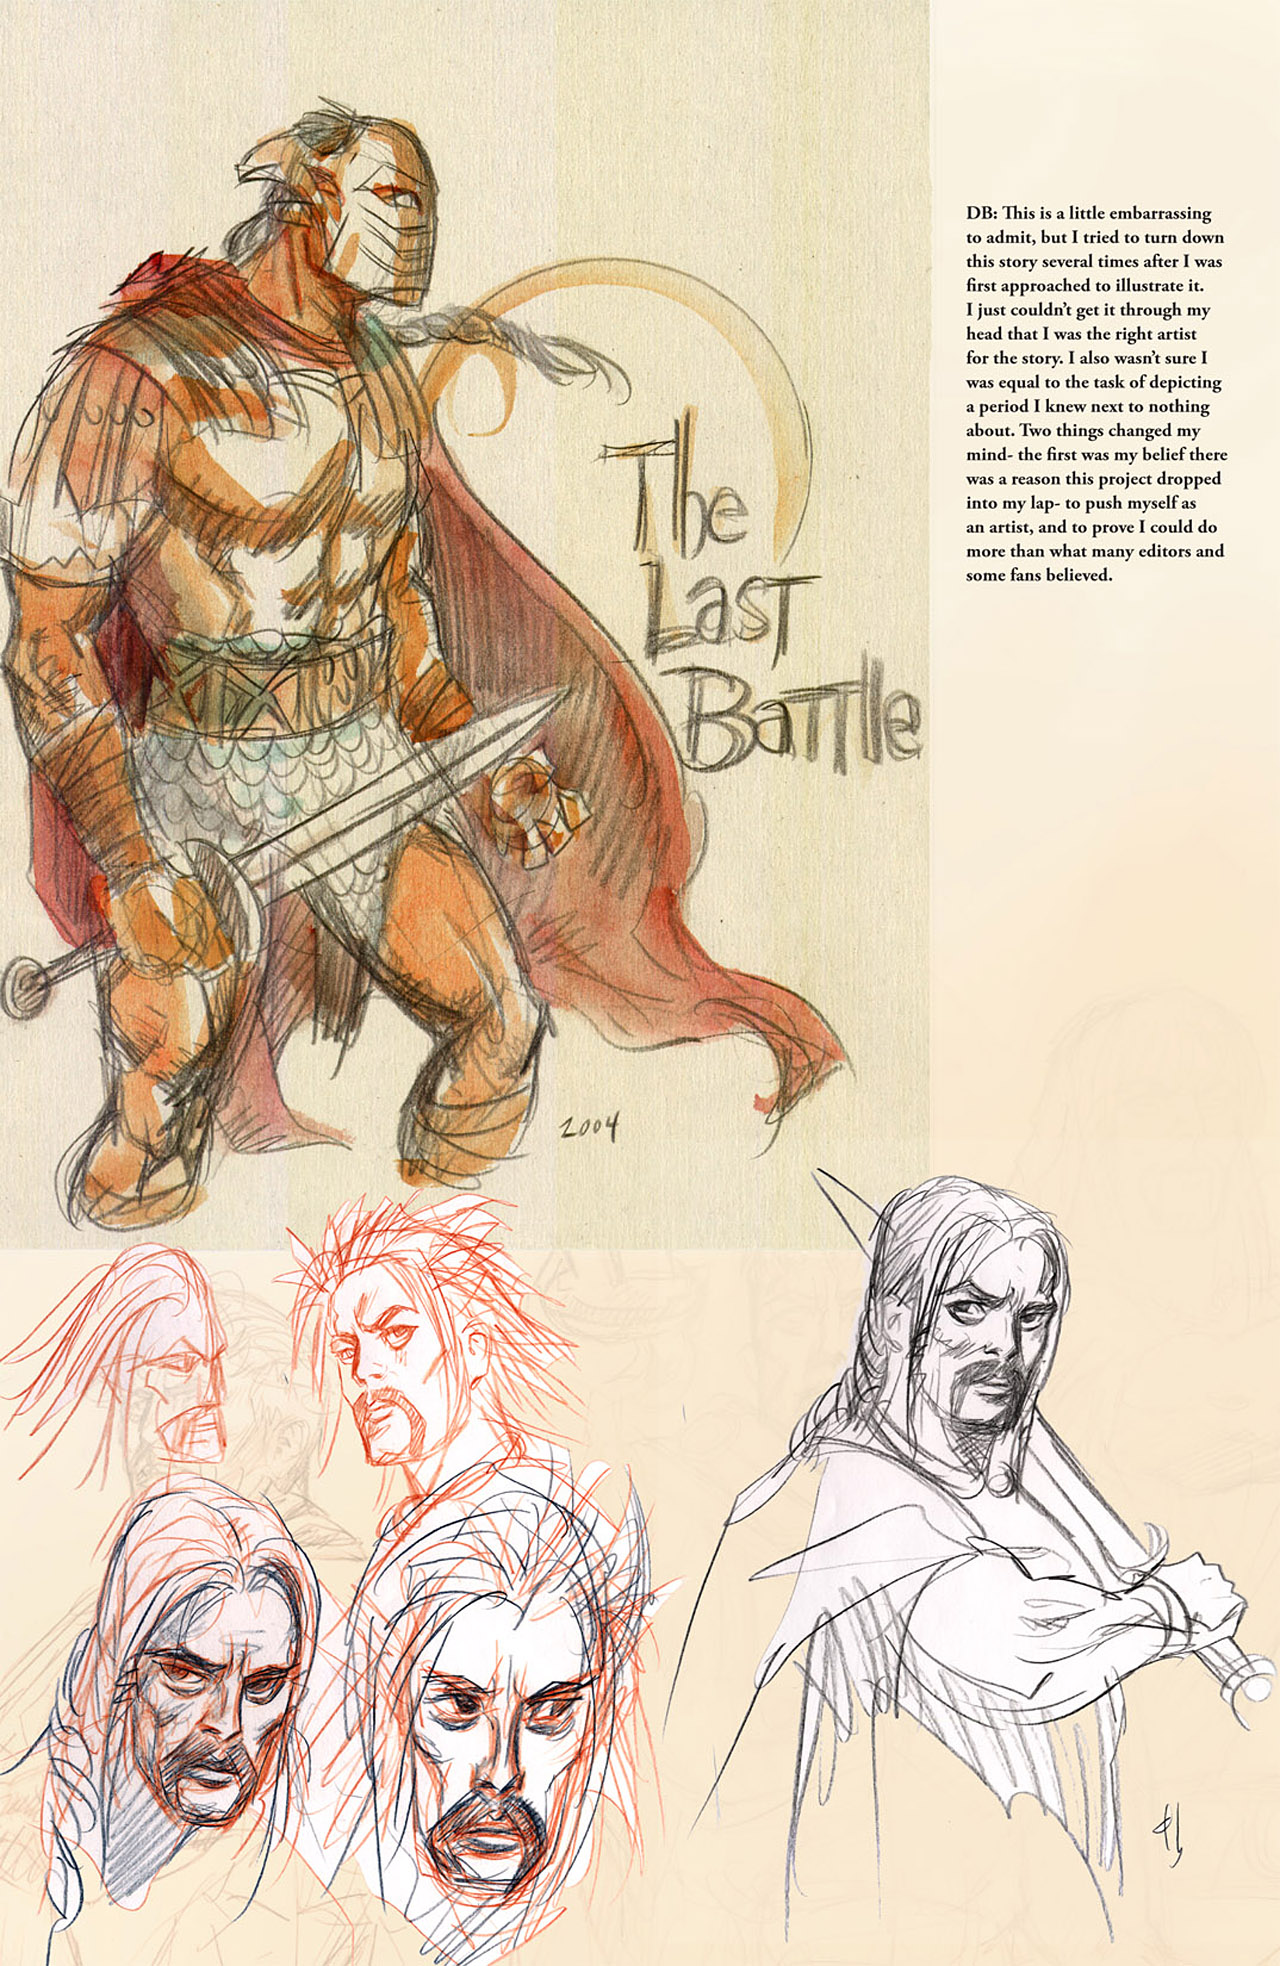 Read online The Last Battle comic -  Issue # TPB - 72